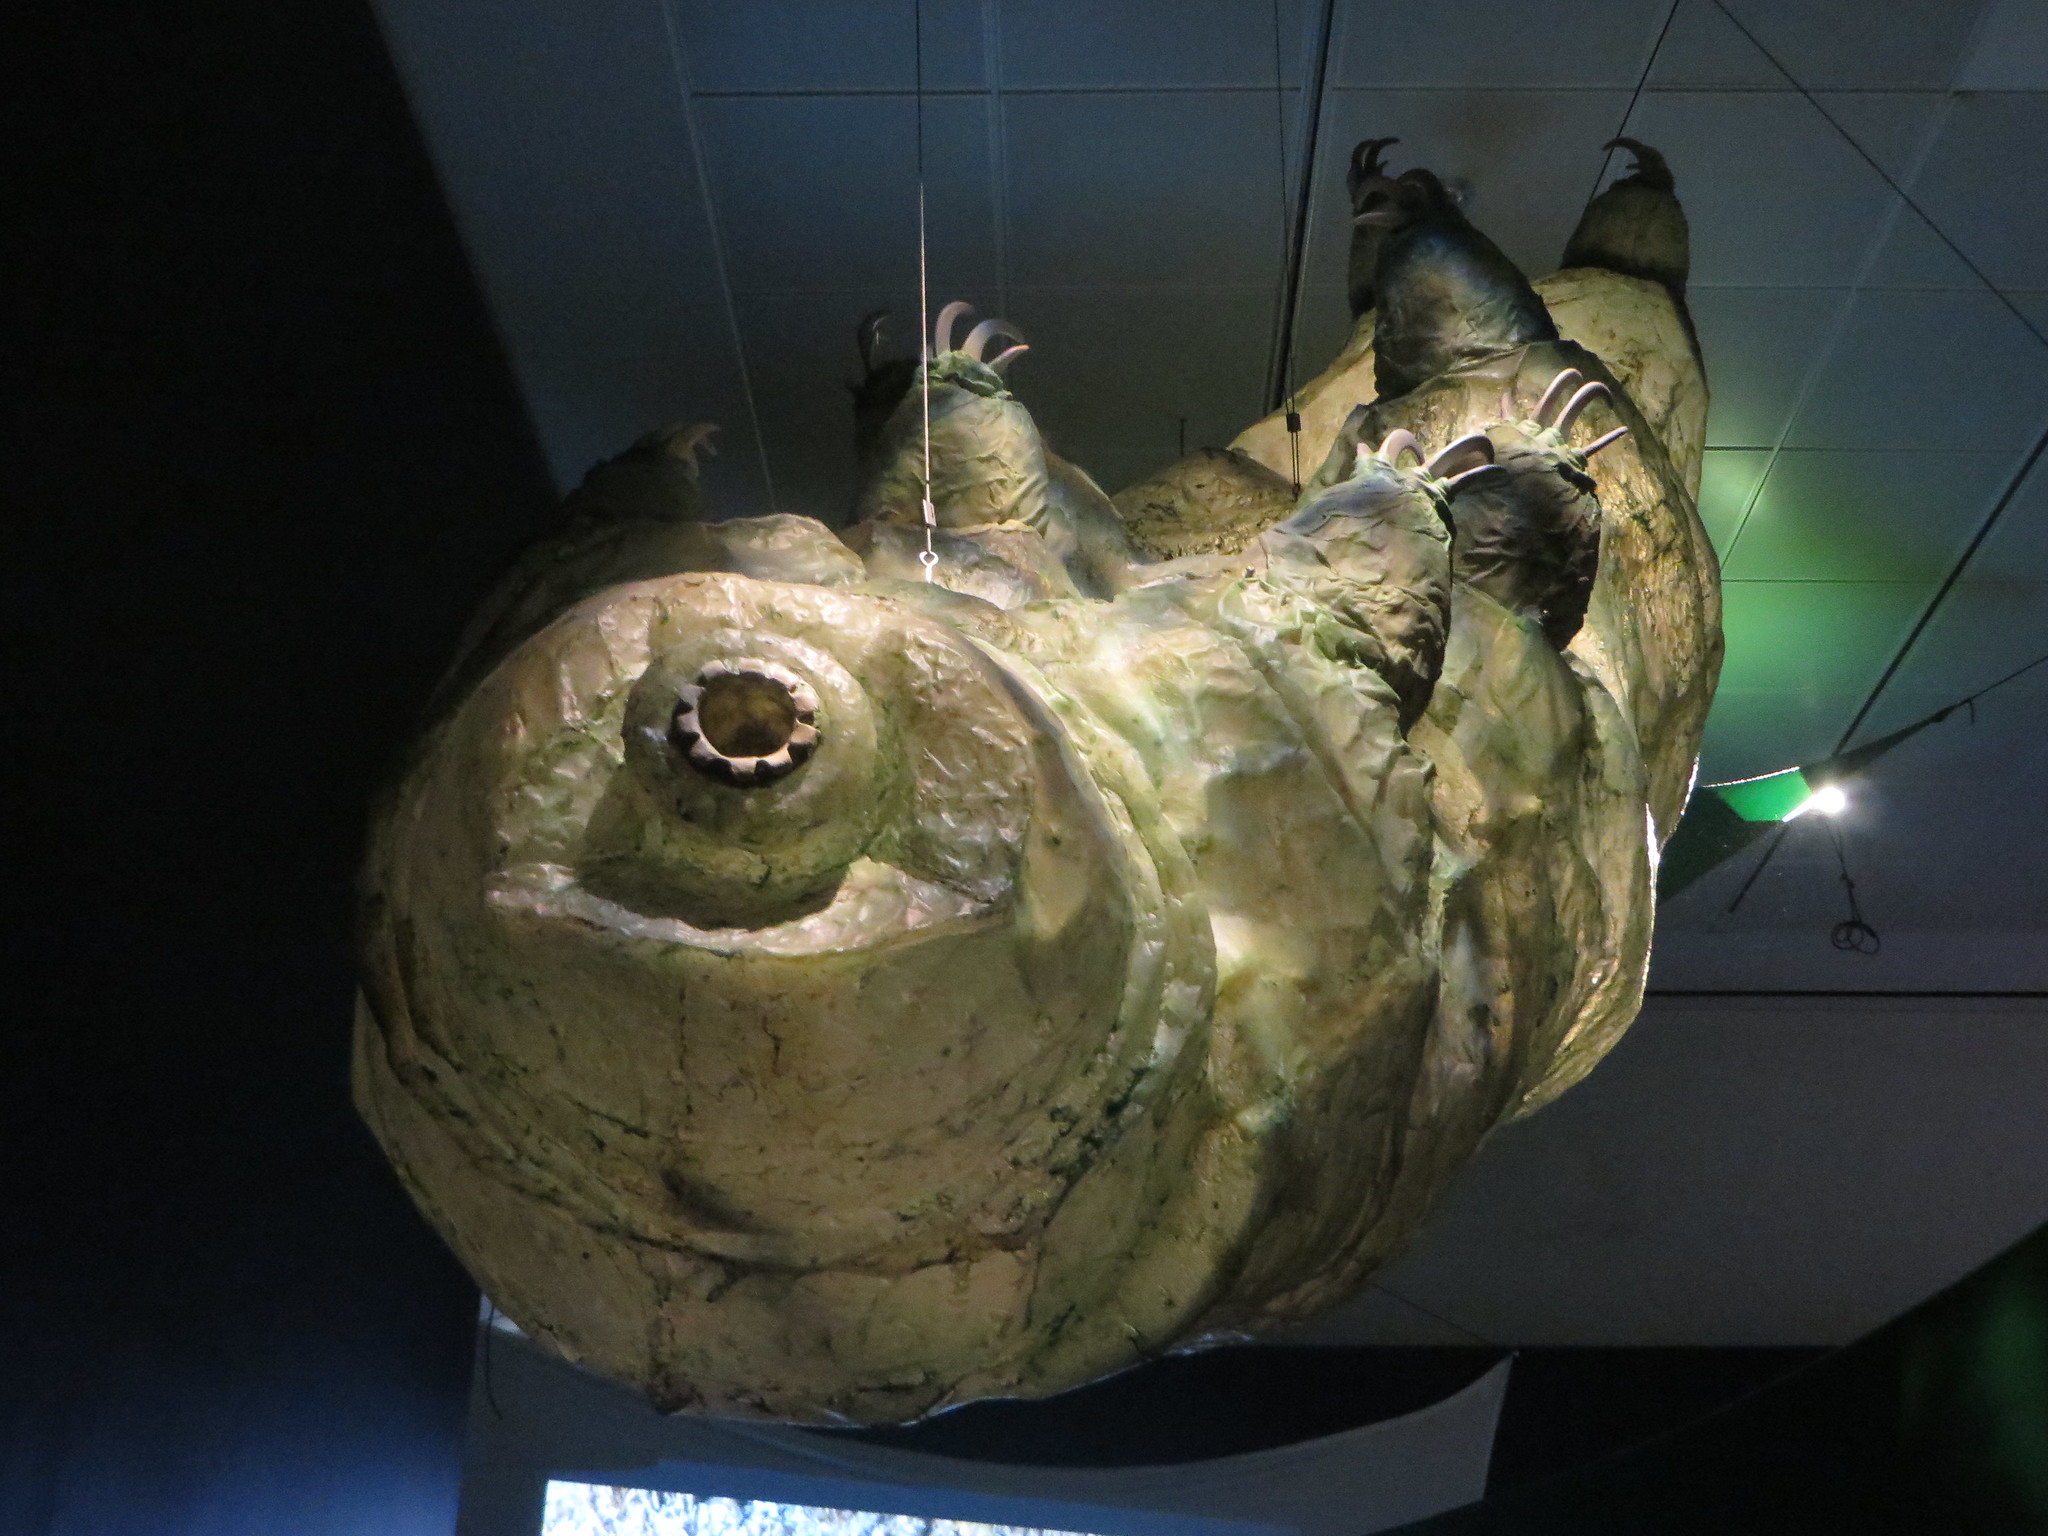 The water bear or moss piglet is a tiny invertebrate that's been around on Earth for more than half a billion years. This is a giant model at the AMNH's "Life at the Limits" exhibit. Photo courtesy of Eden, Janine, and Jim(CC BY 2.0)